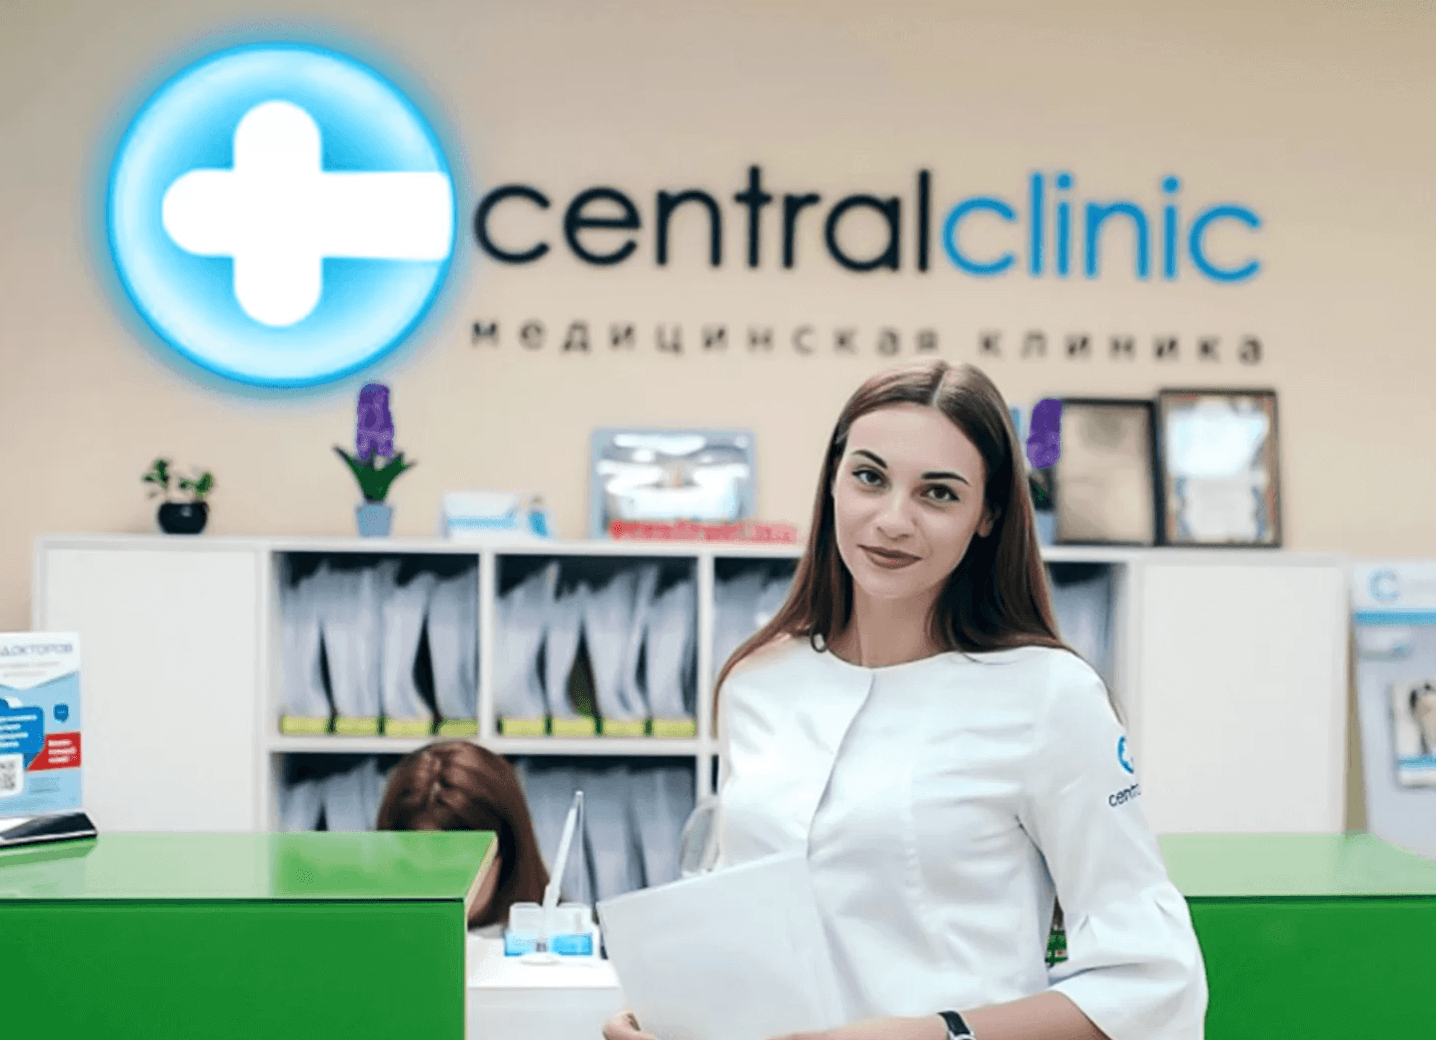 Central clinic. Централ клиник Воронеж. Центр клиник Воронеж. Централ клиник Воронеж Среднемосковская.